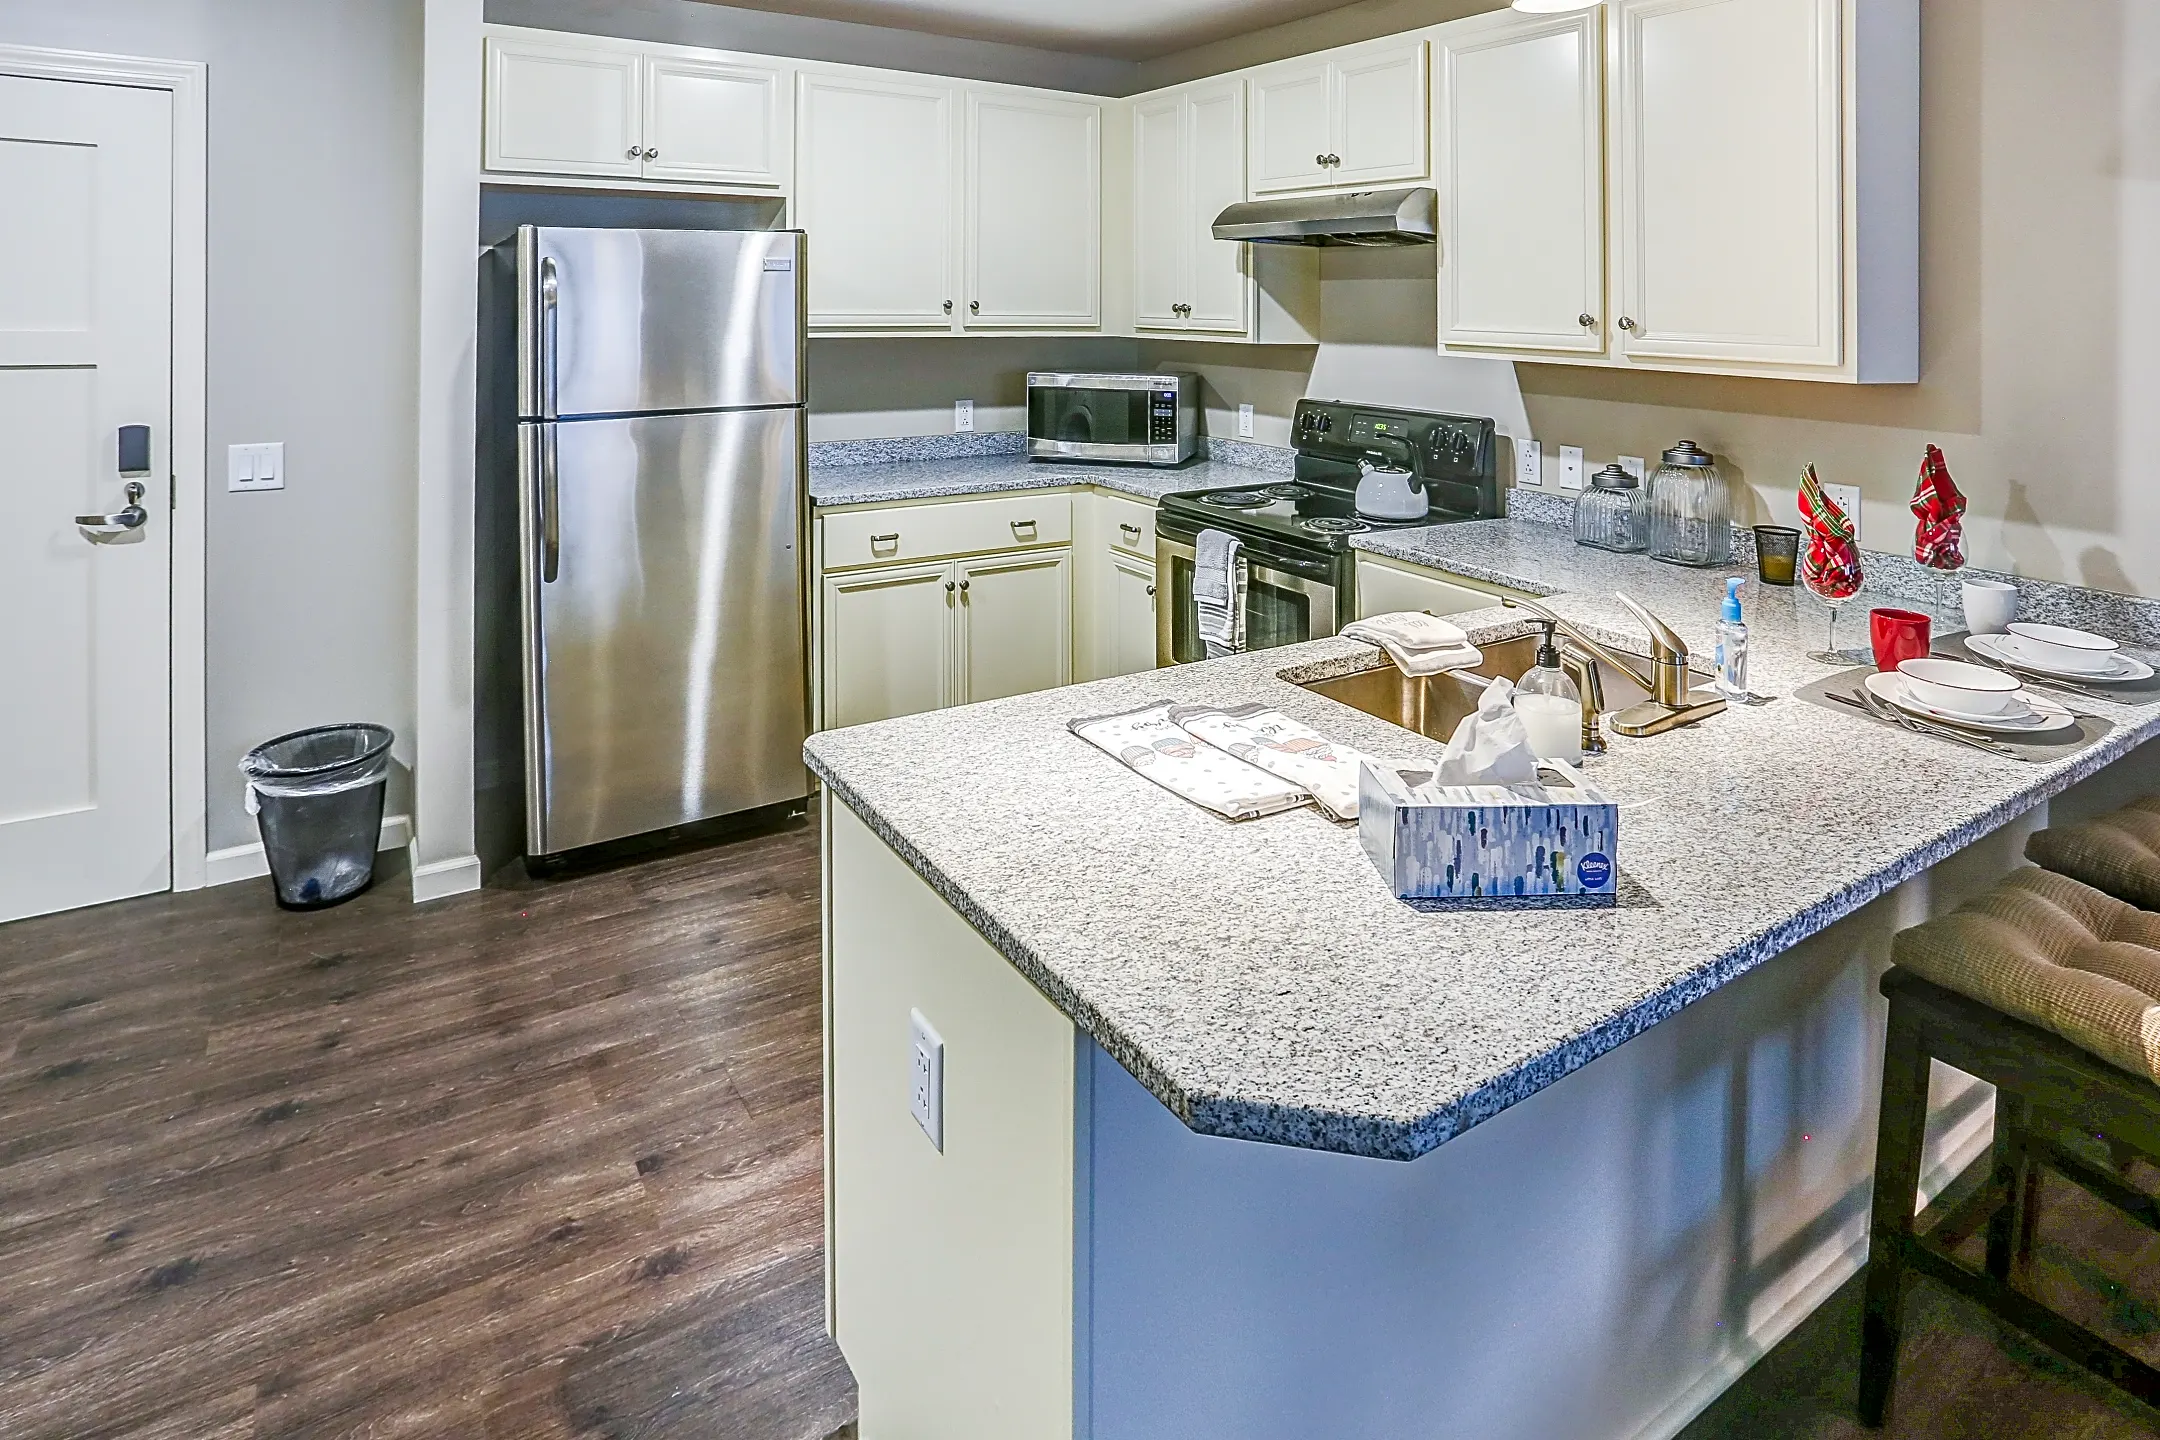 Kitchen - Chateau at Heritage Square 55+ Community - Brockport, NY